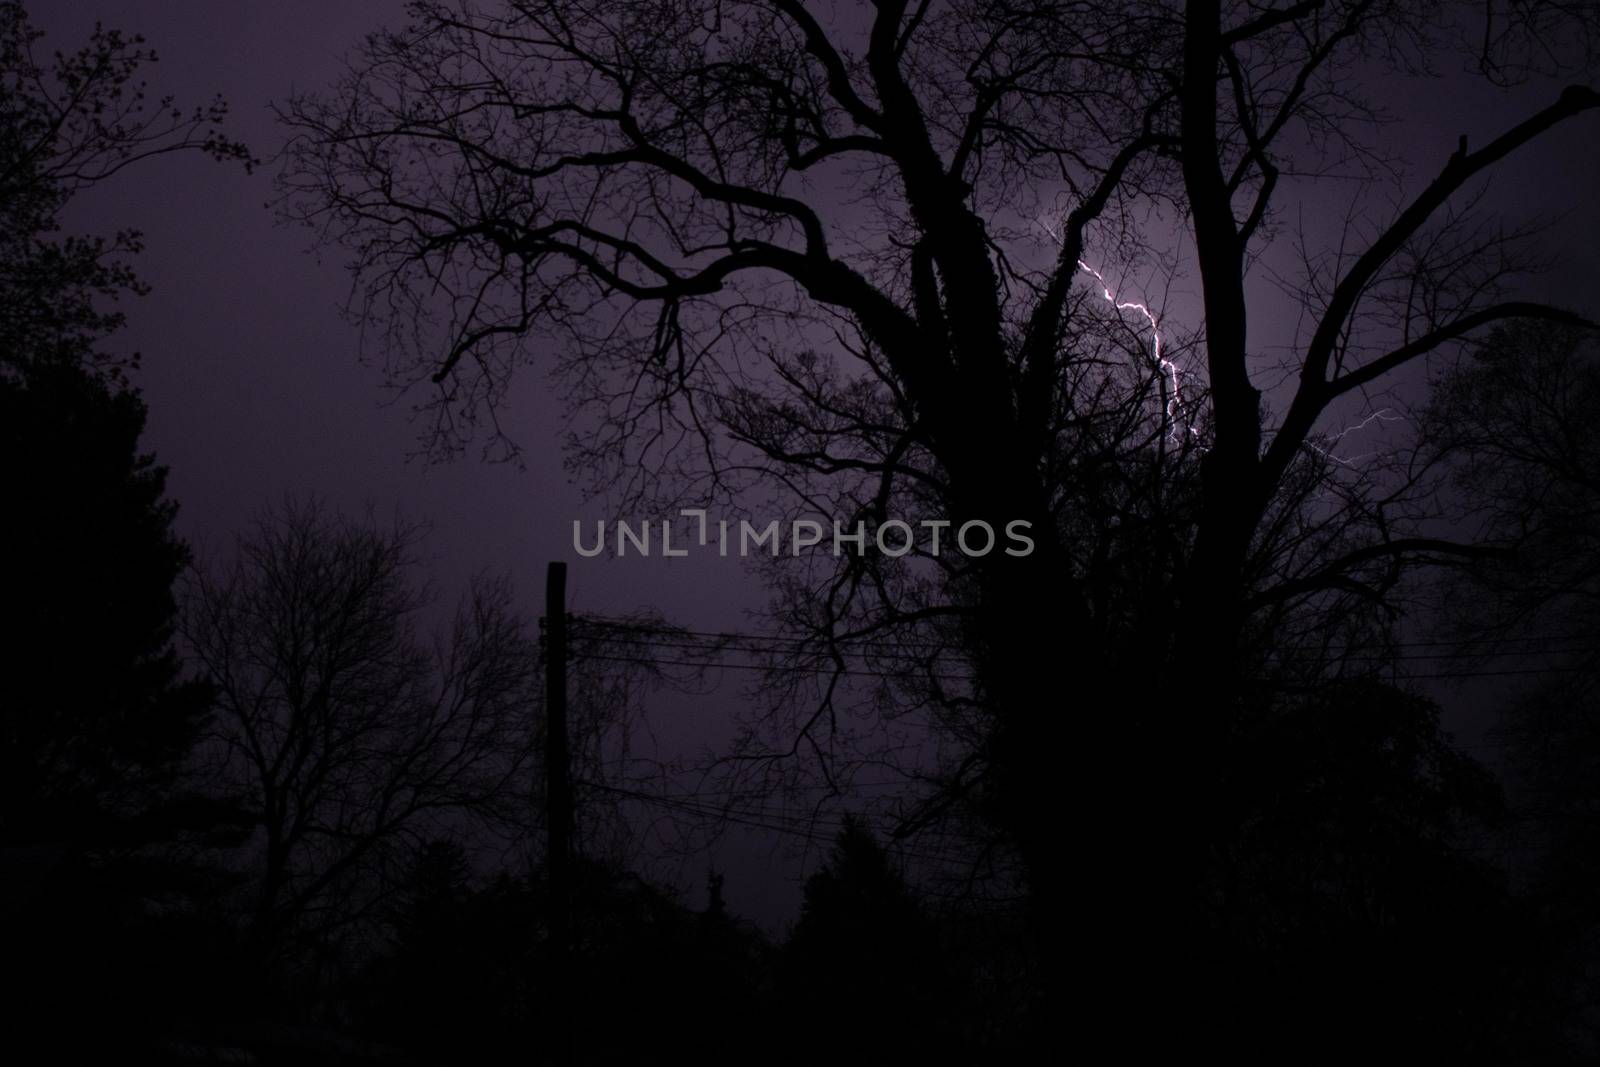 A Purple Lightning Strike Behind Silhouetted Trees